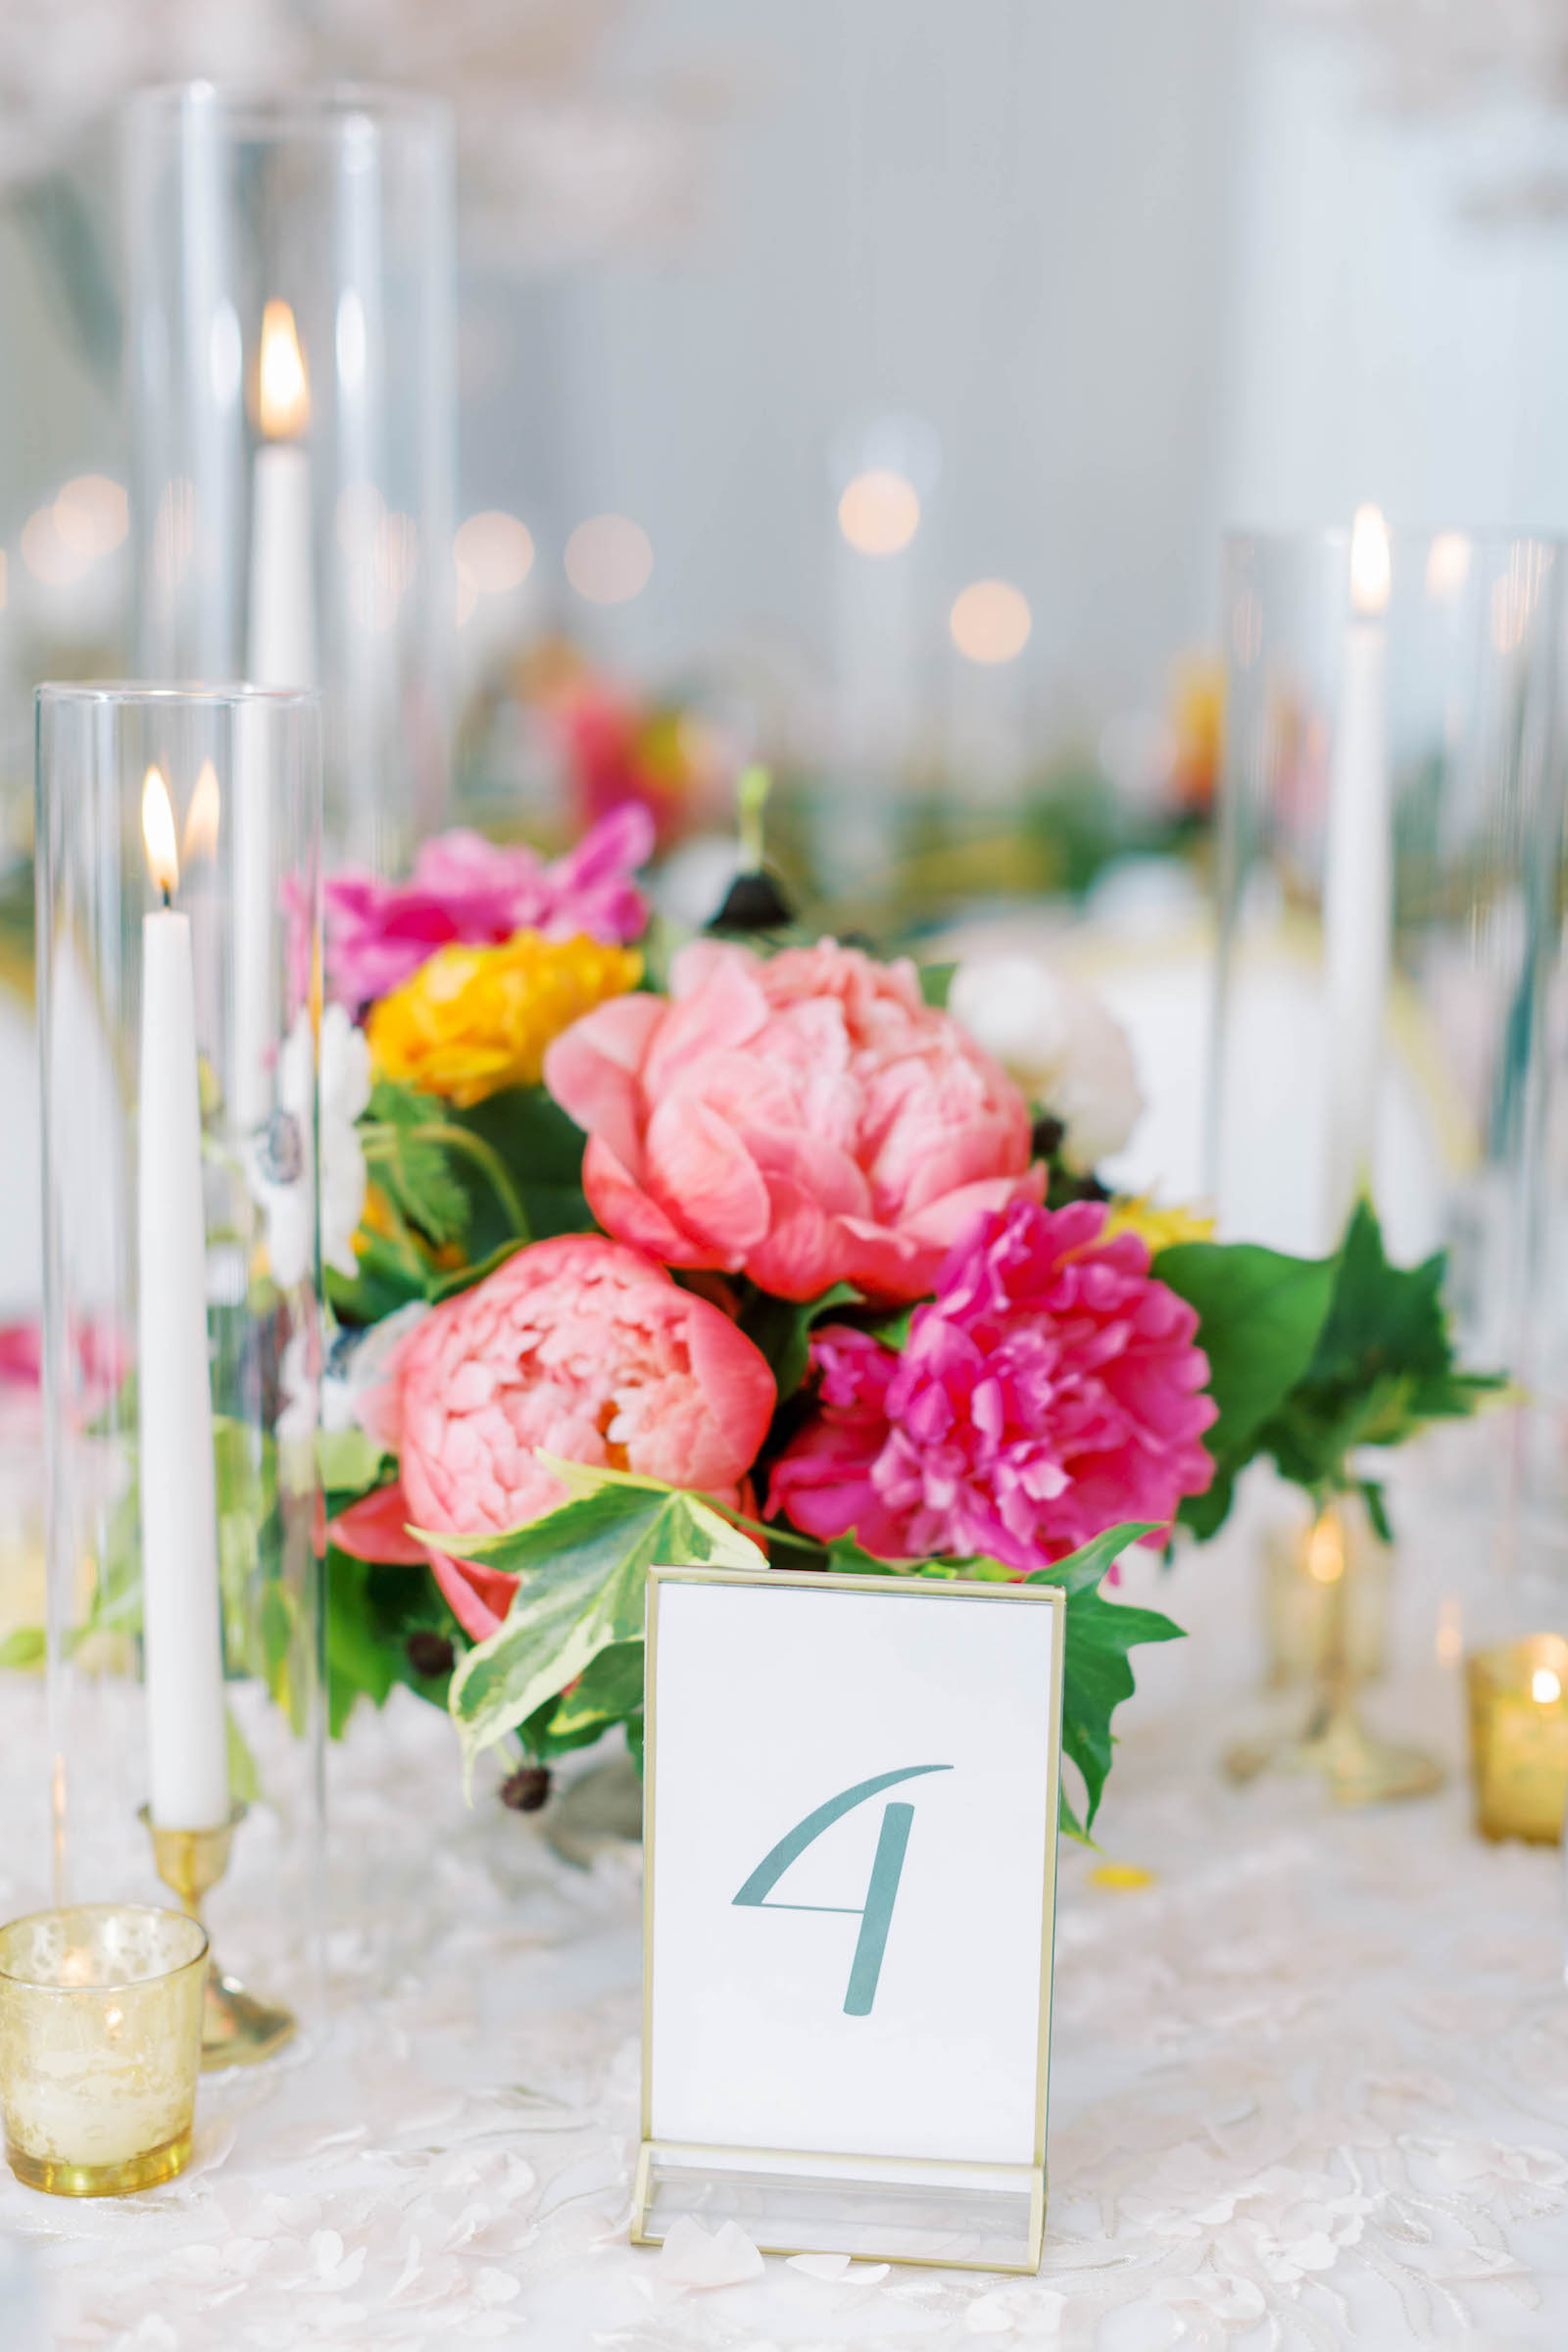 White and Gold Table Numbers with Tall White Candle Sticks and Gold Holders | Peony Centerpieces in Pink and Orange with Greenery